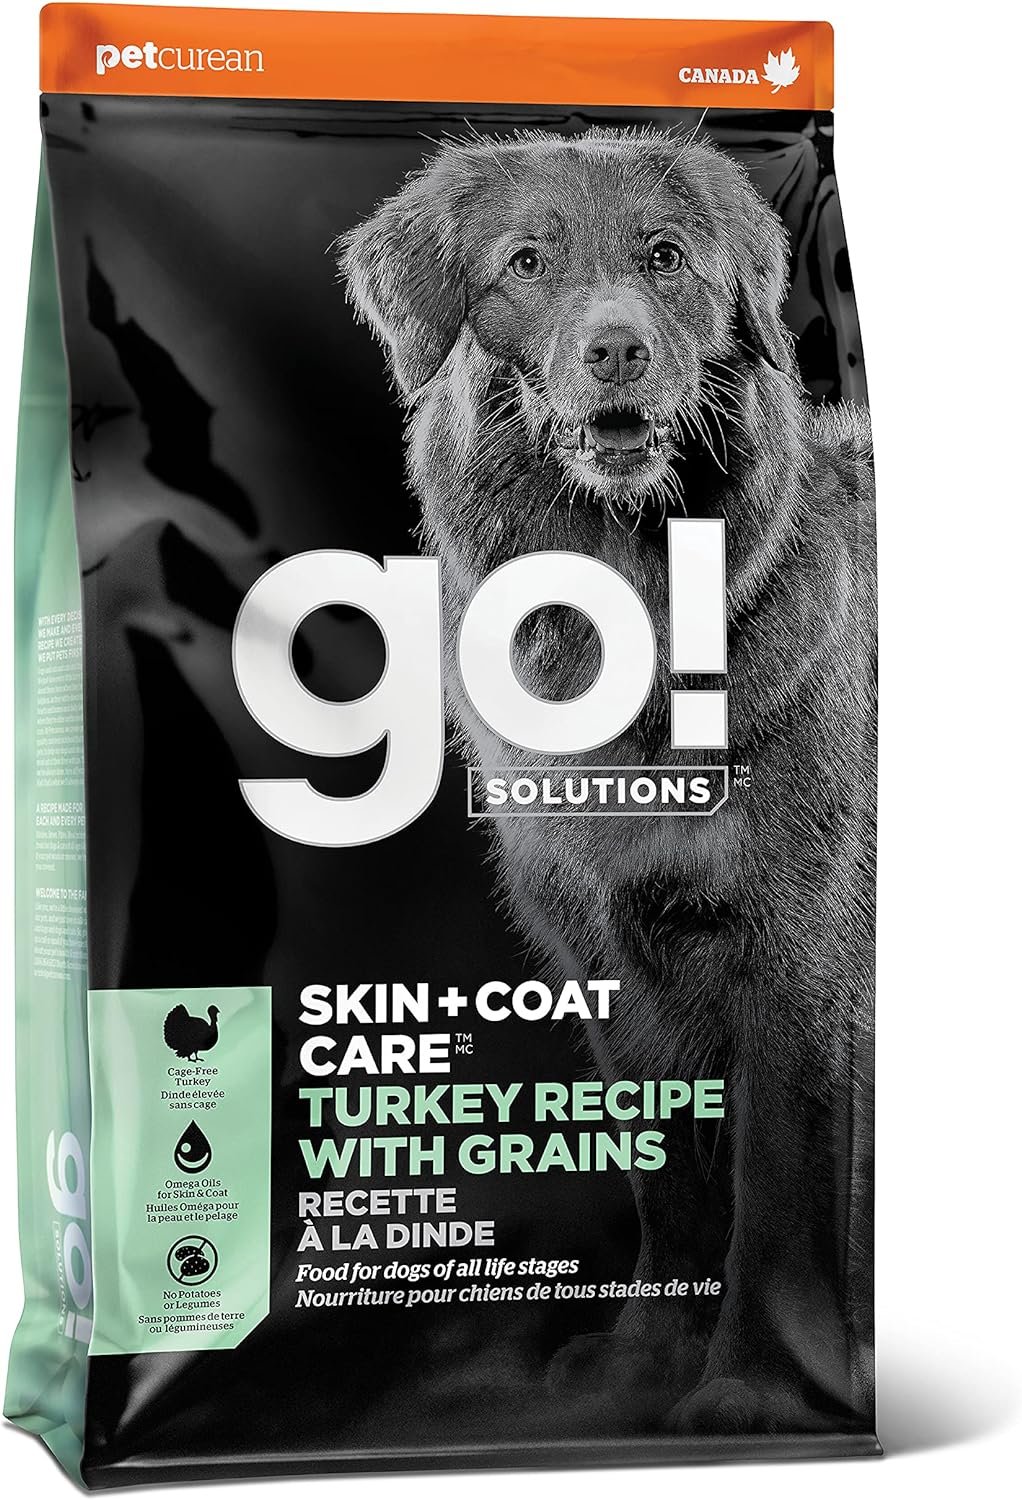 GO! SOLUTIONS Skin + Coat Care - Dry Dog Food, 22 lb - Turkey Recipe with Grains for All Life Stages - Complete + Balanced Nutrition for Dogs